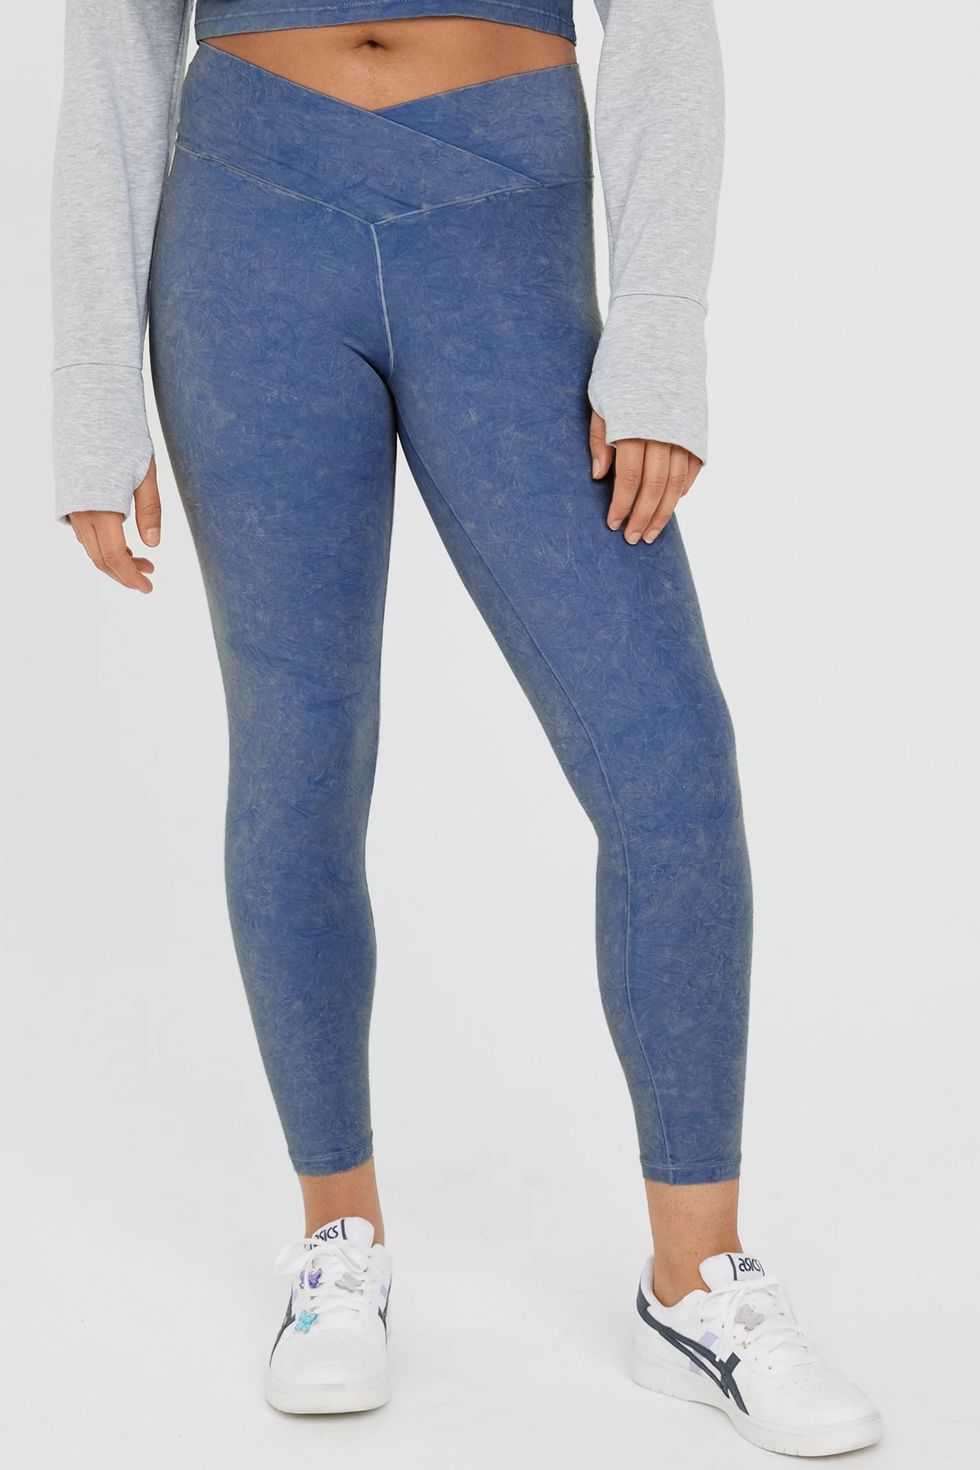 Shop Aerie's Crossover Leggings, Starting at 25% Off